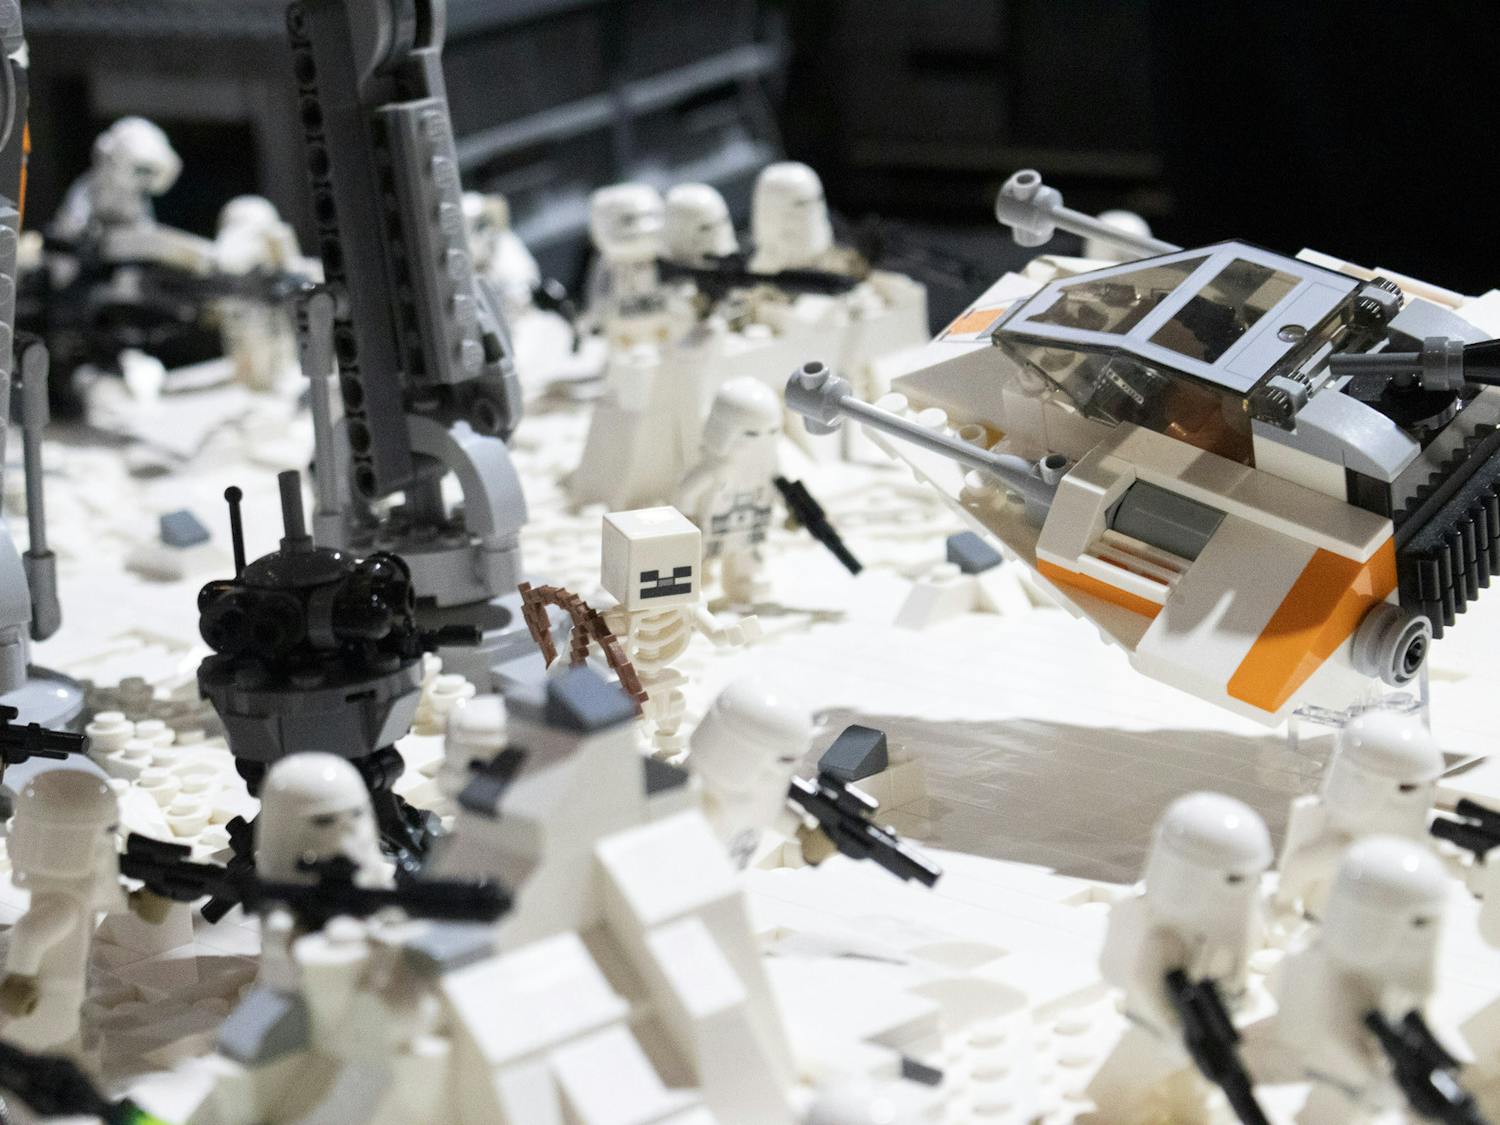 "Star Wars'" Battle of Hoth sits on display at Columbia Brick Con on March 25, 2023. Columbia Brick Con is hosted by LEGO User Group S.C. Bricks.